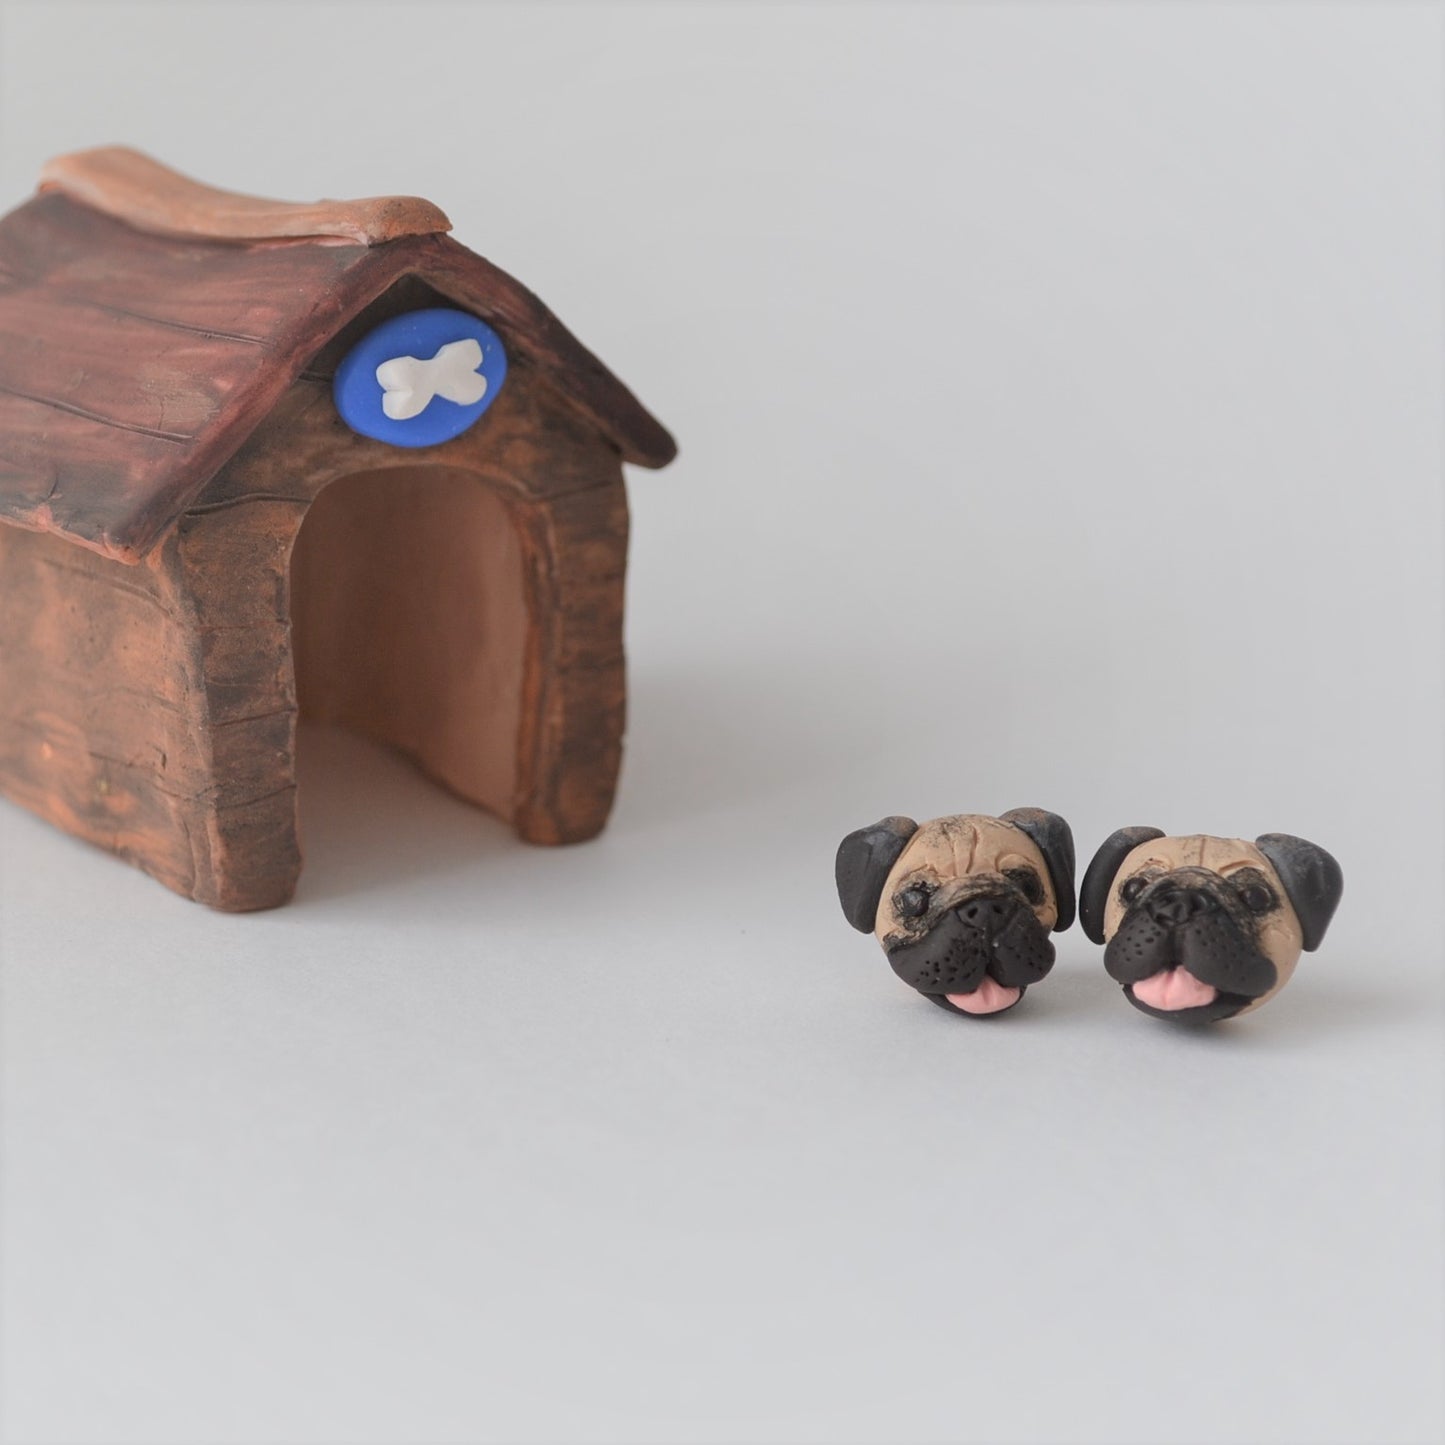 Handmade polymer clay pug stud earrings shown styled in front of a mini kennel